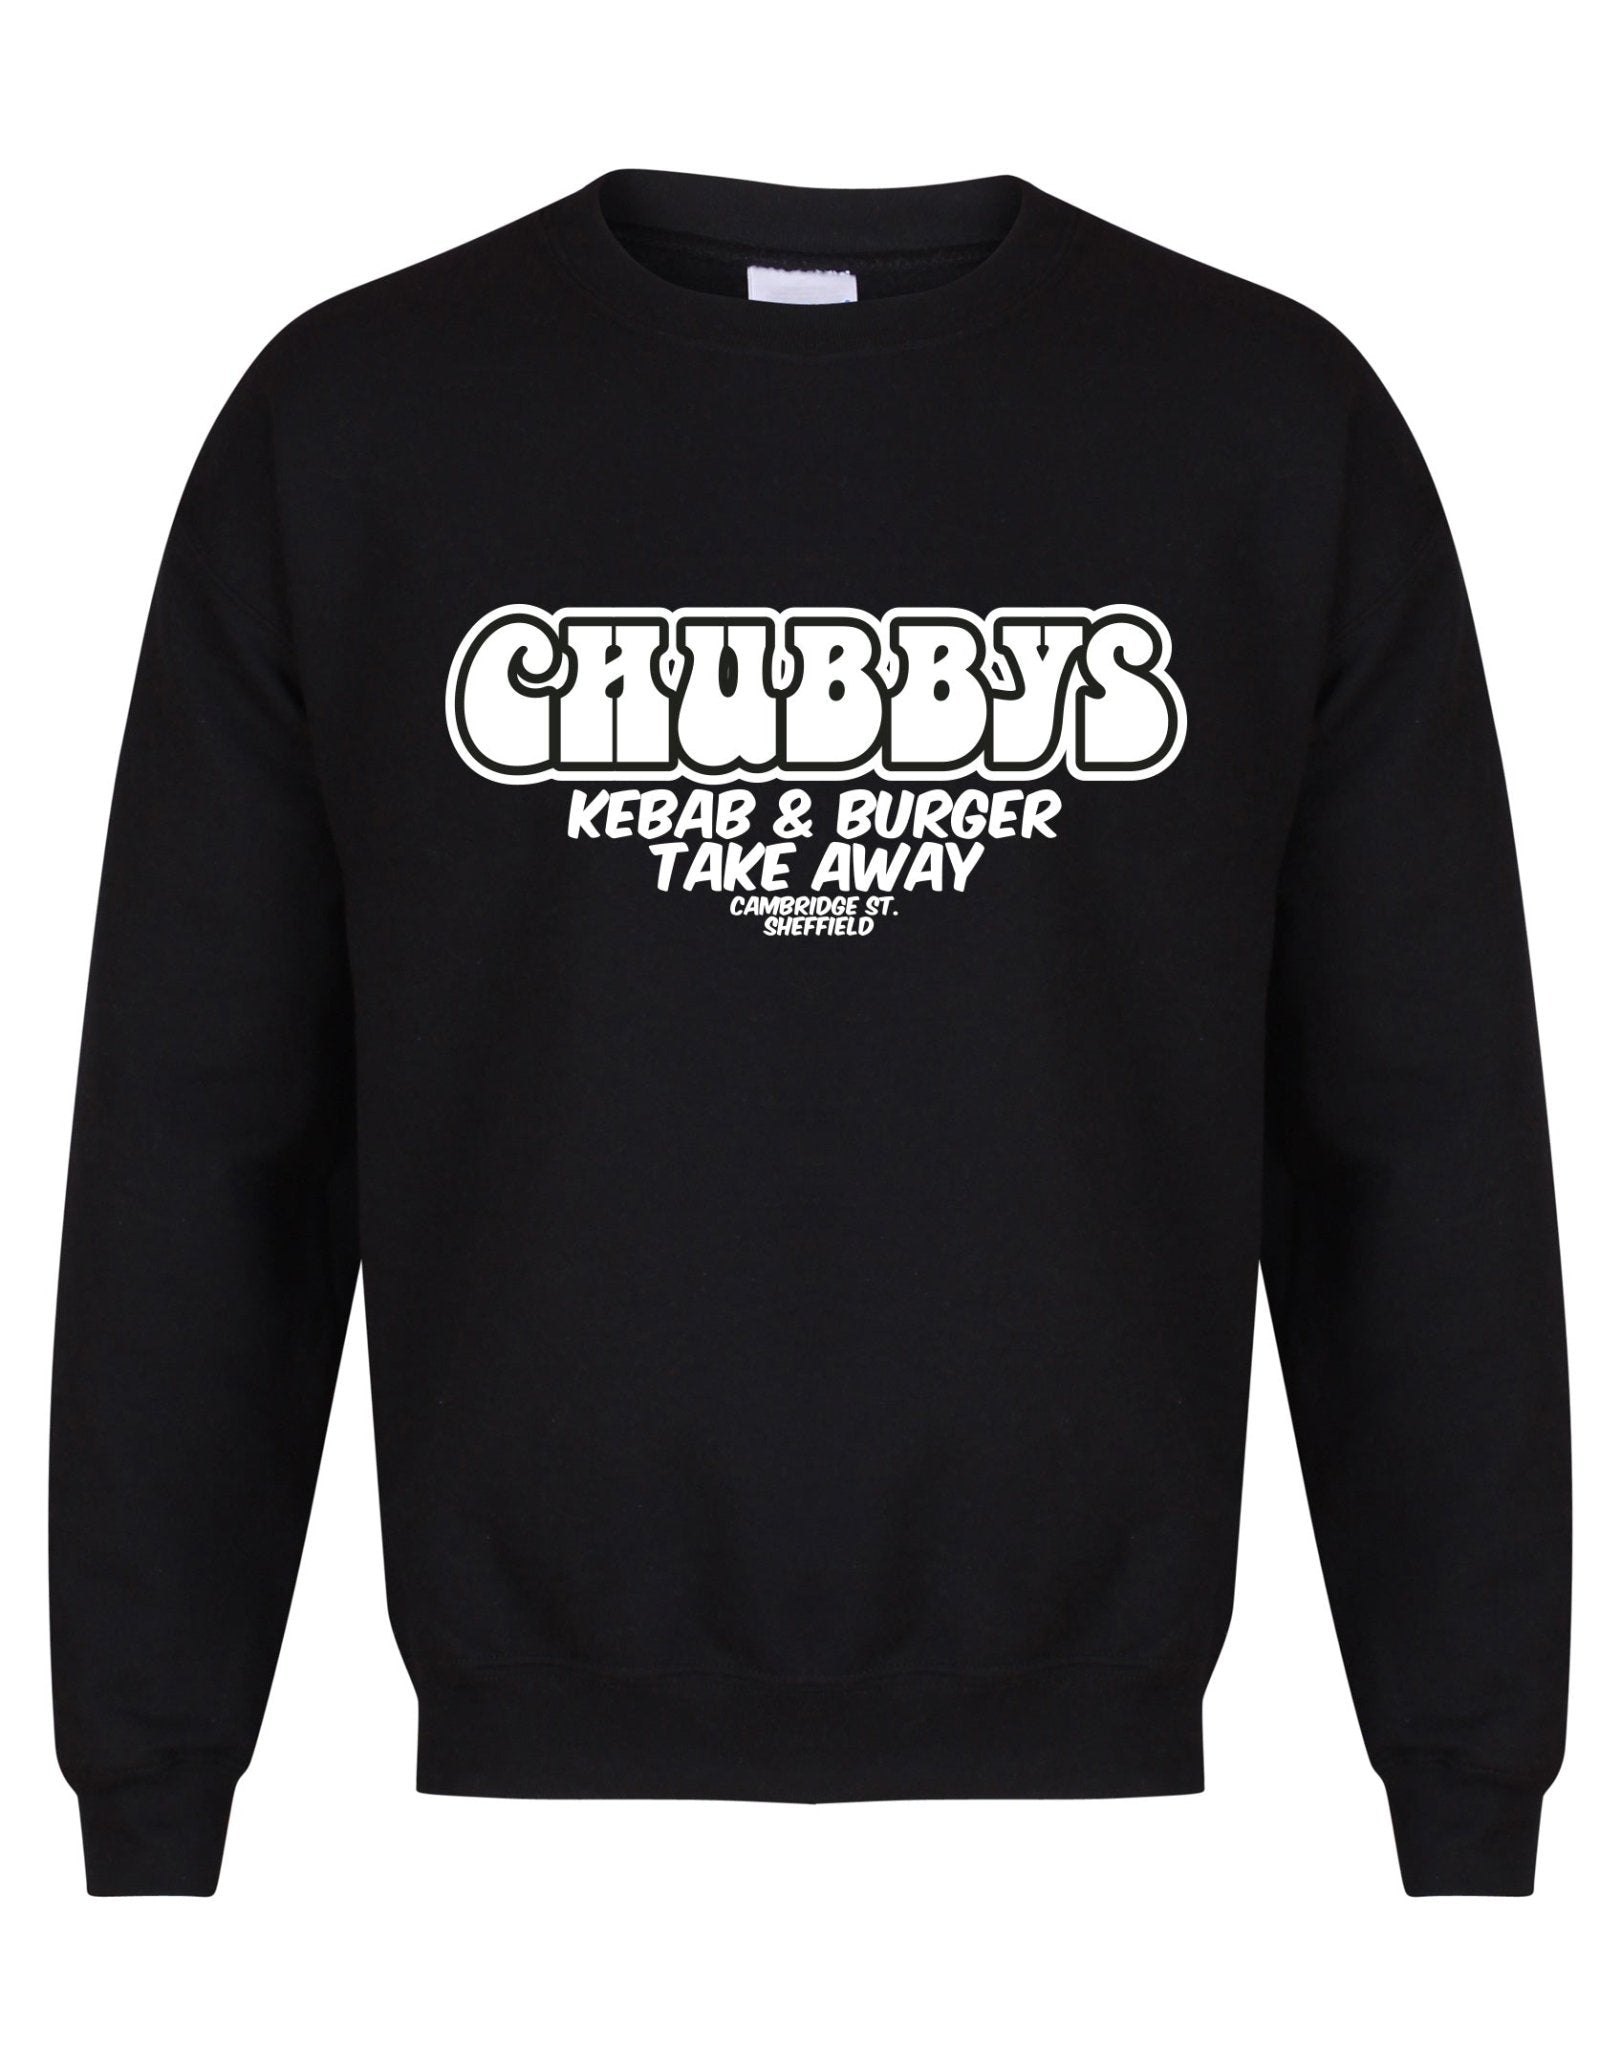 Chubbys unisex fit sweatshirt - various colours - Dirty Stop Outs